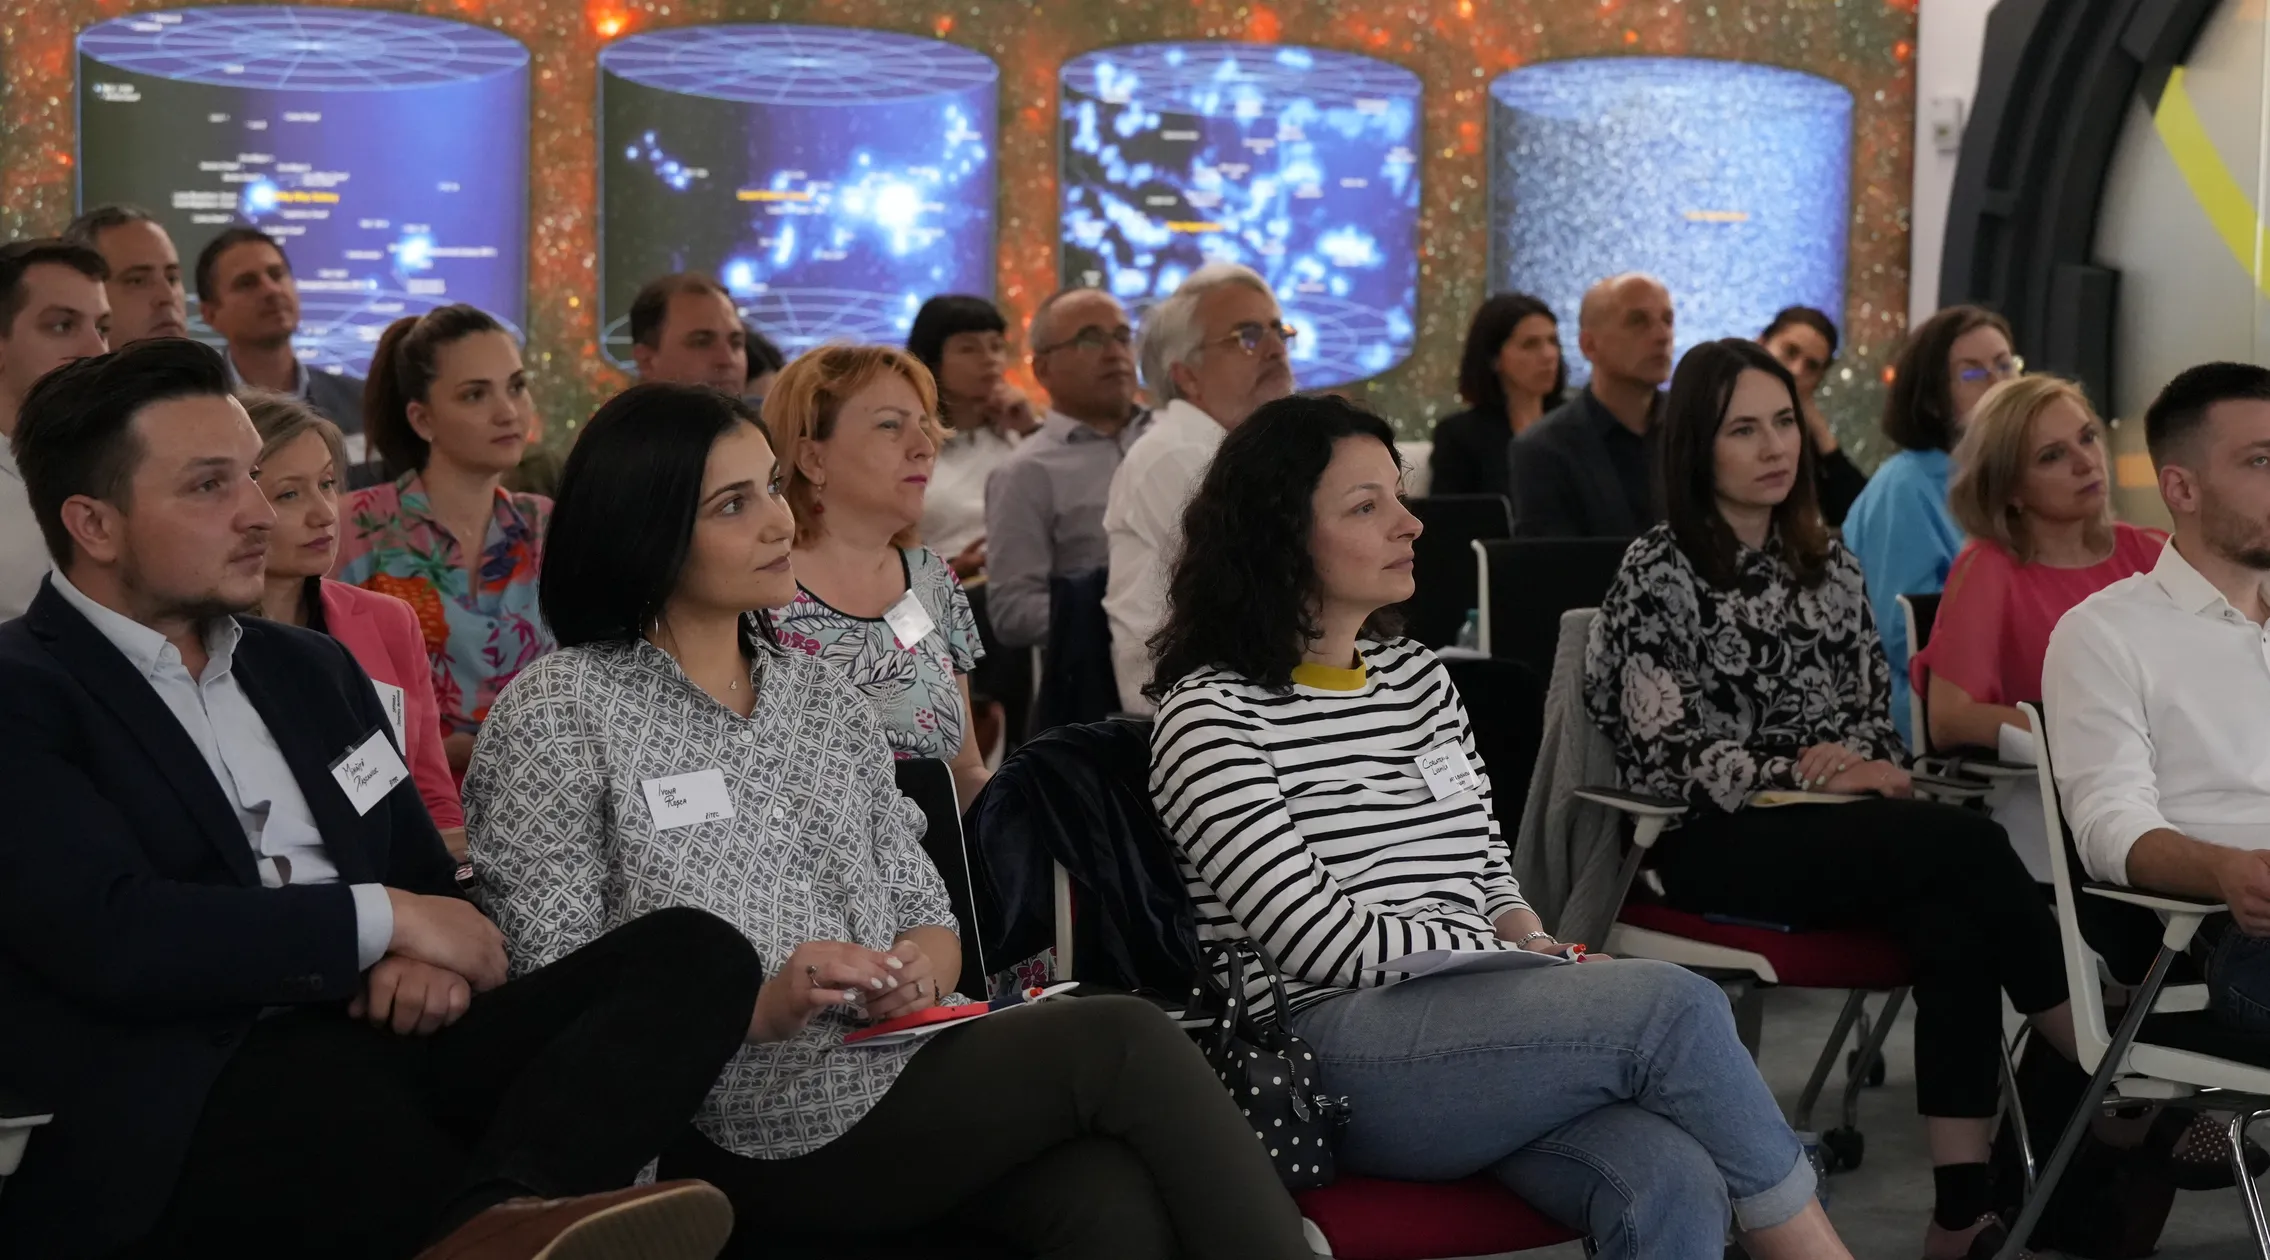 From inspiration to implementation: Zitec's event empowers digital marketing success